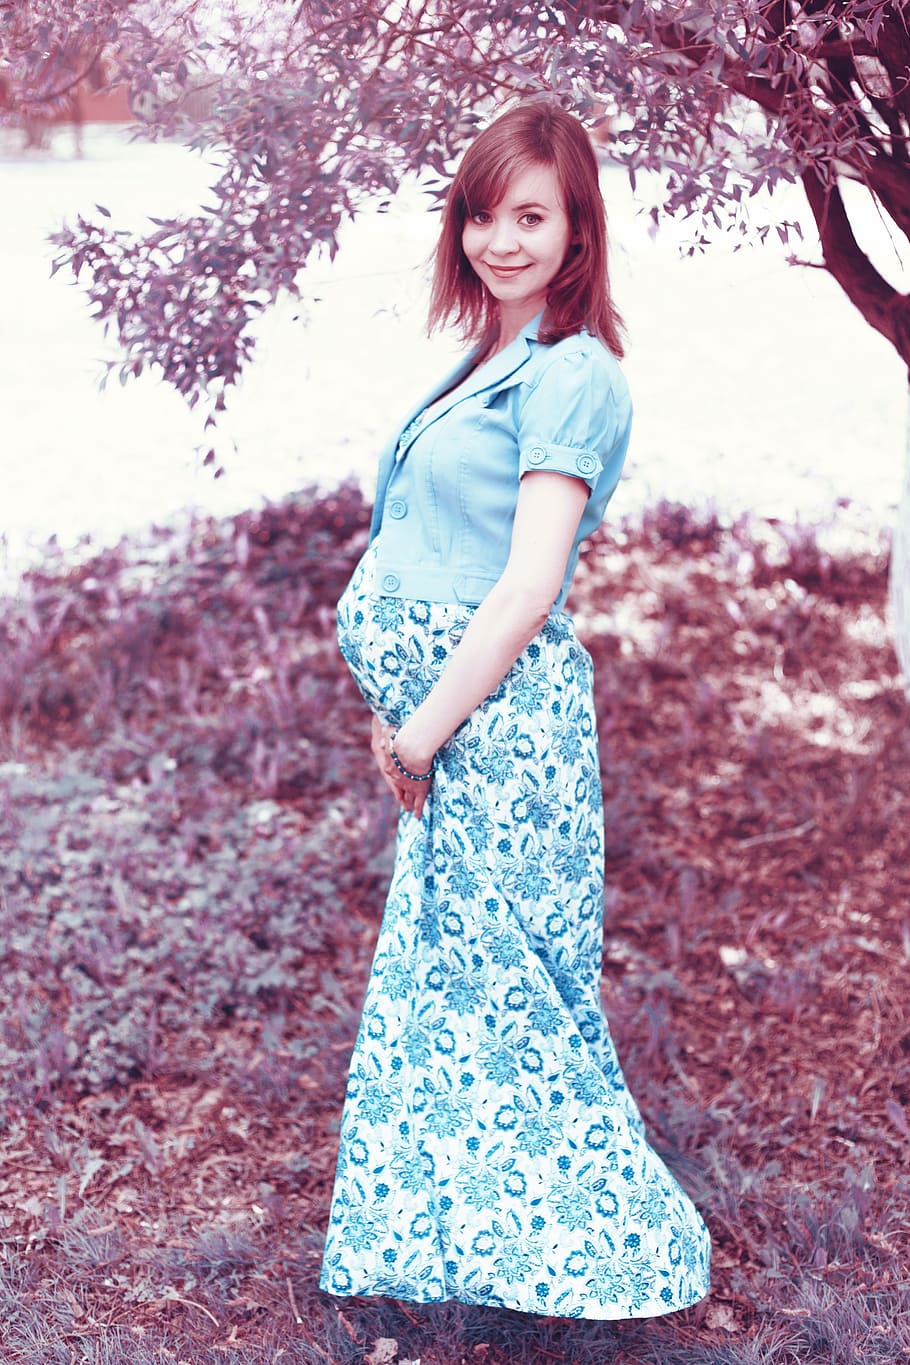 pregnant, woman, wearing, blue, floral, dress, standing, tree, daytime, stand by